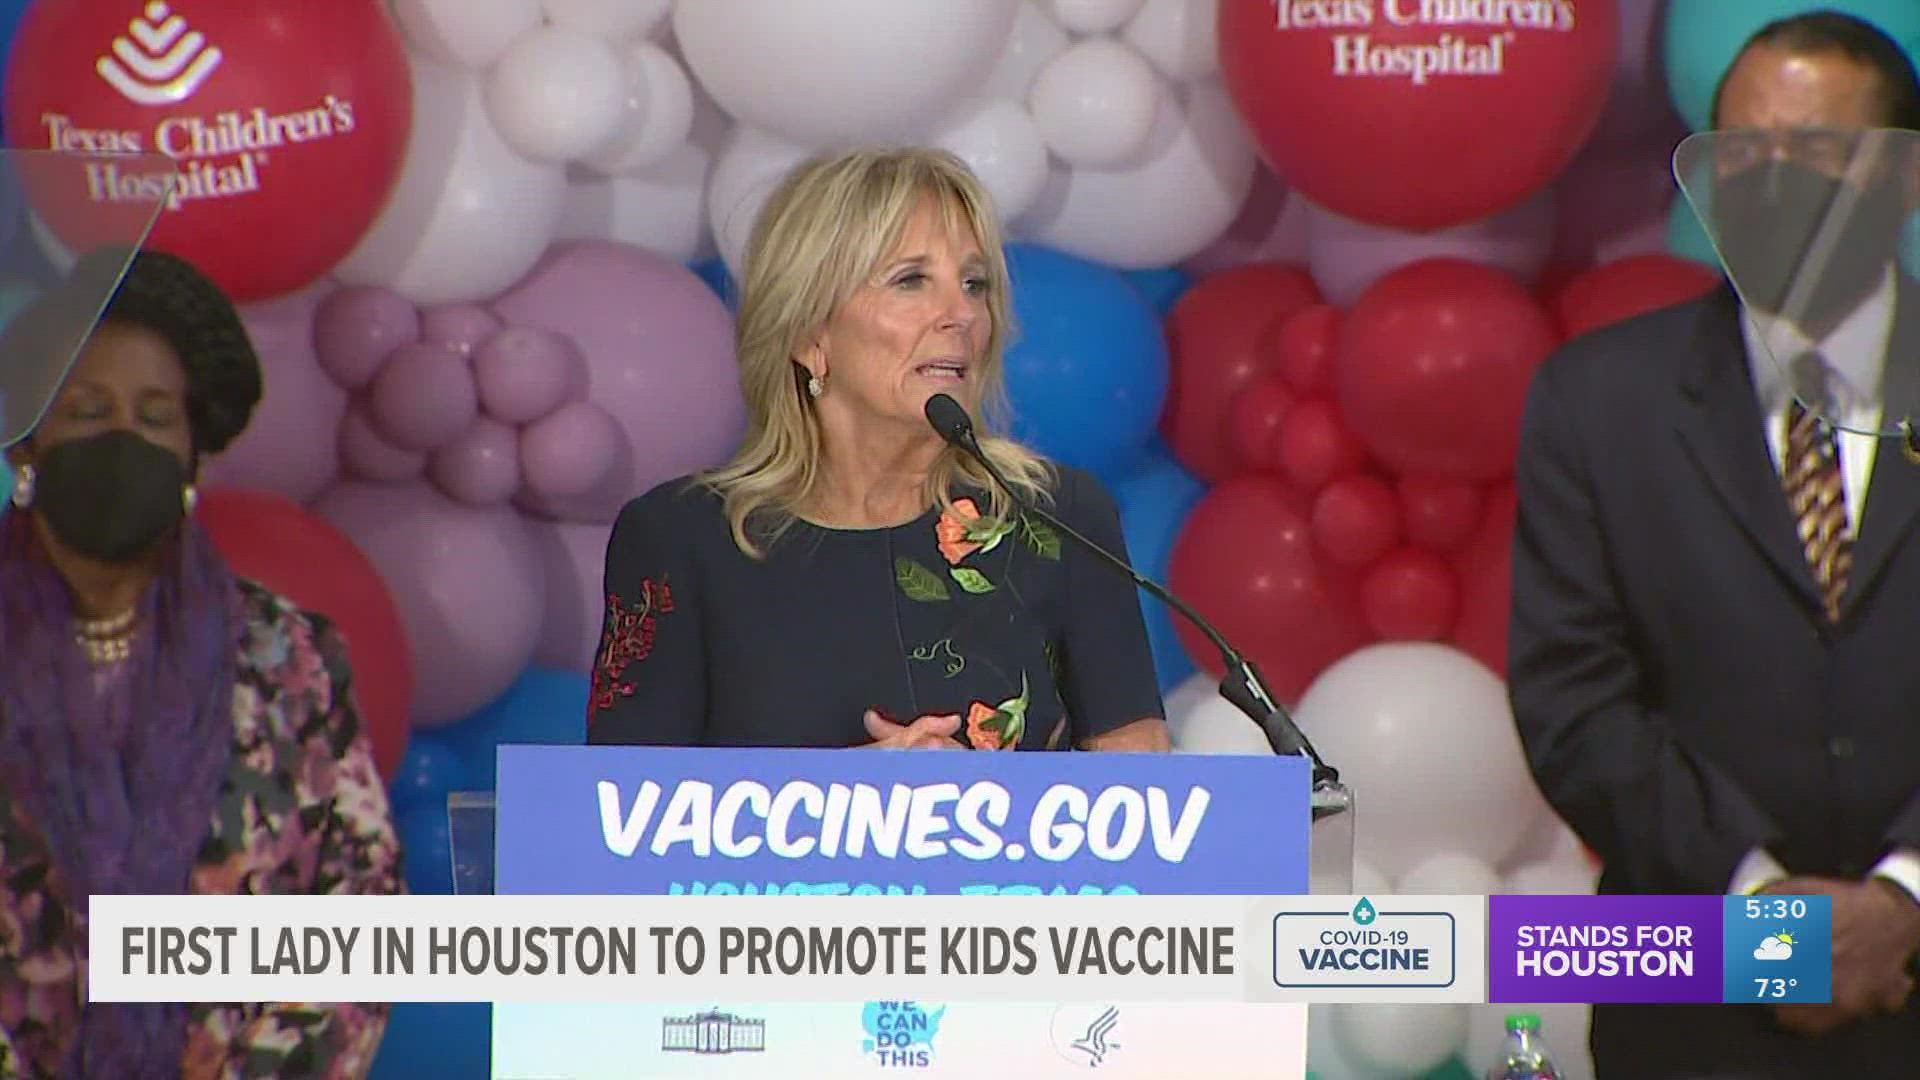 Dr. Biden is visiting Houston’s Texas Children’s Hospital as part of a national campaign to encourage parents to get their children vaccinated against COVID-19.